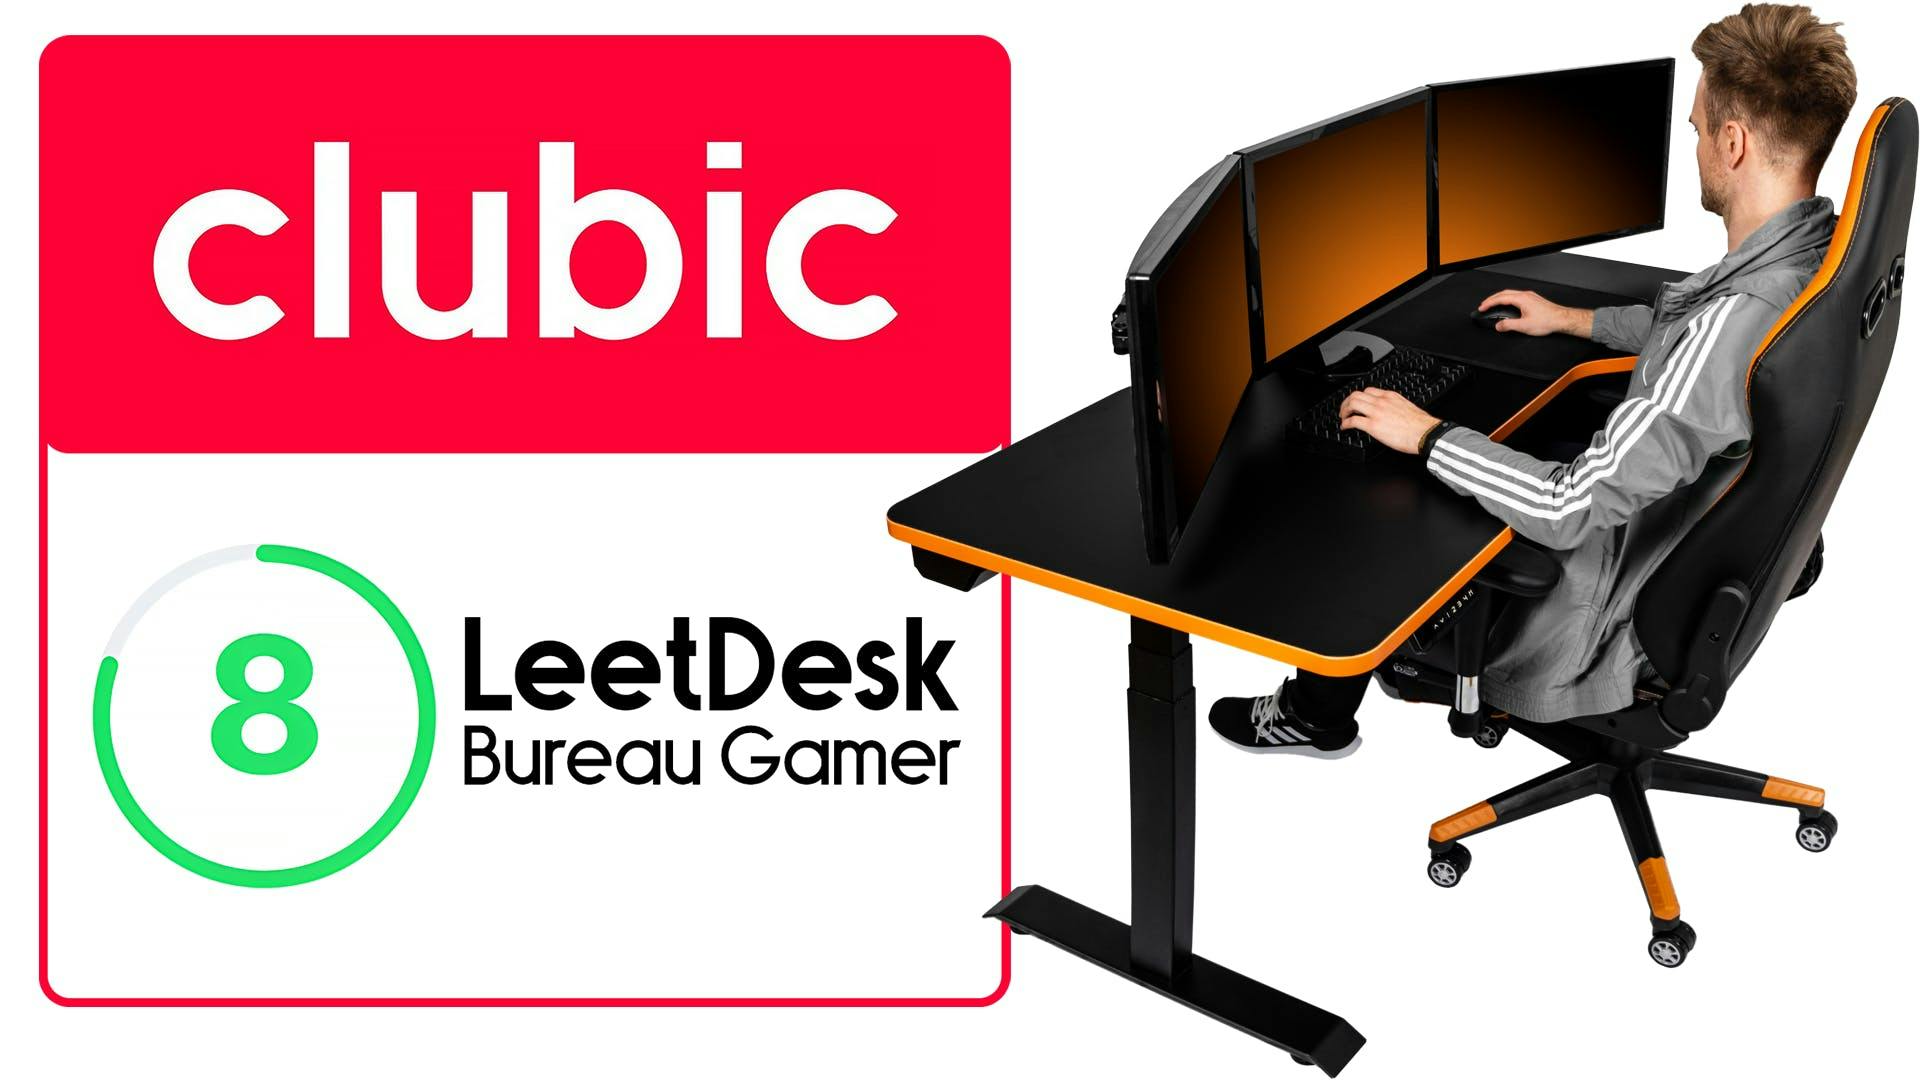 French computer magazine Clubic rates the LeetDesk gaming desk with 8 out of 10 points.